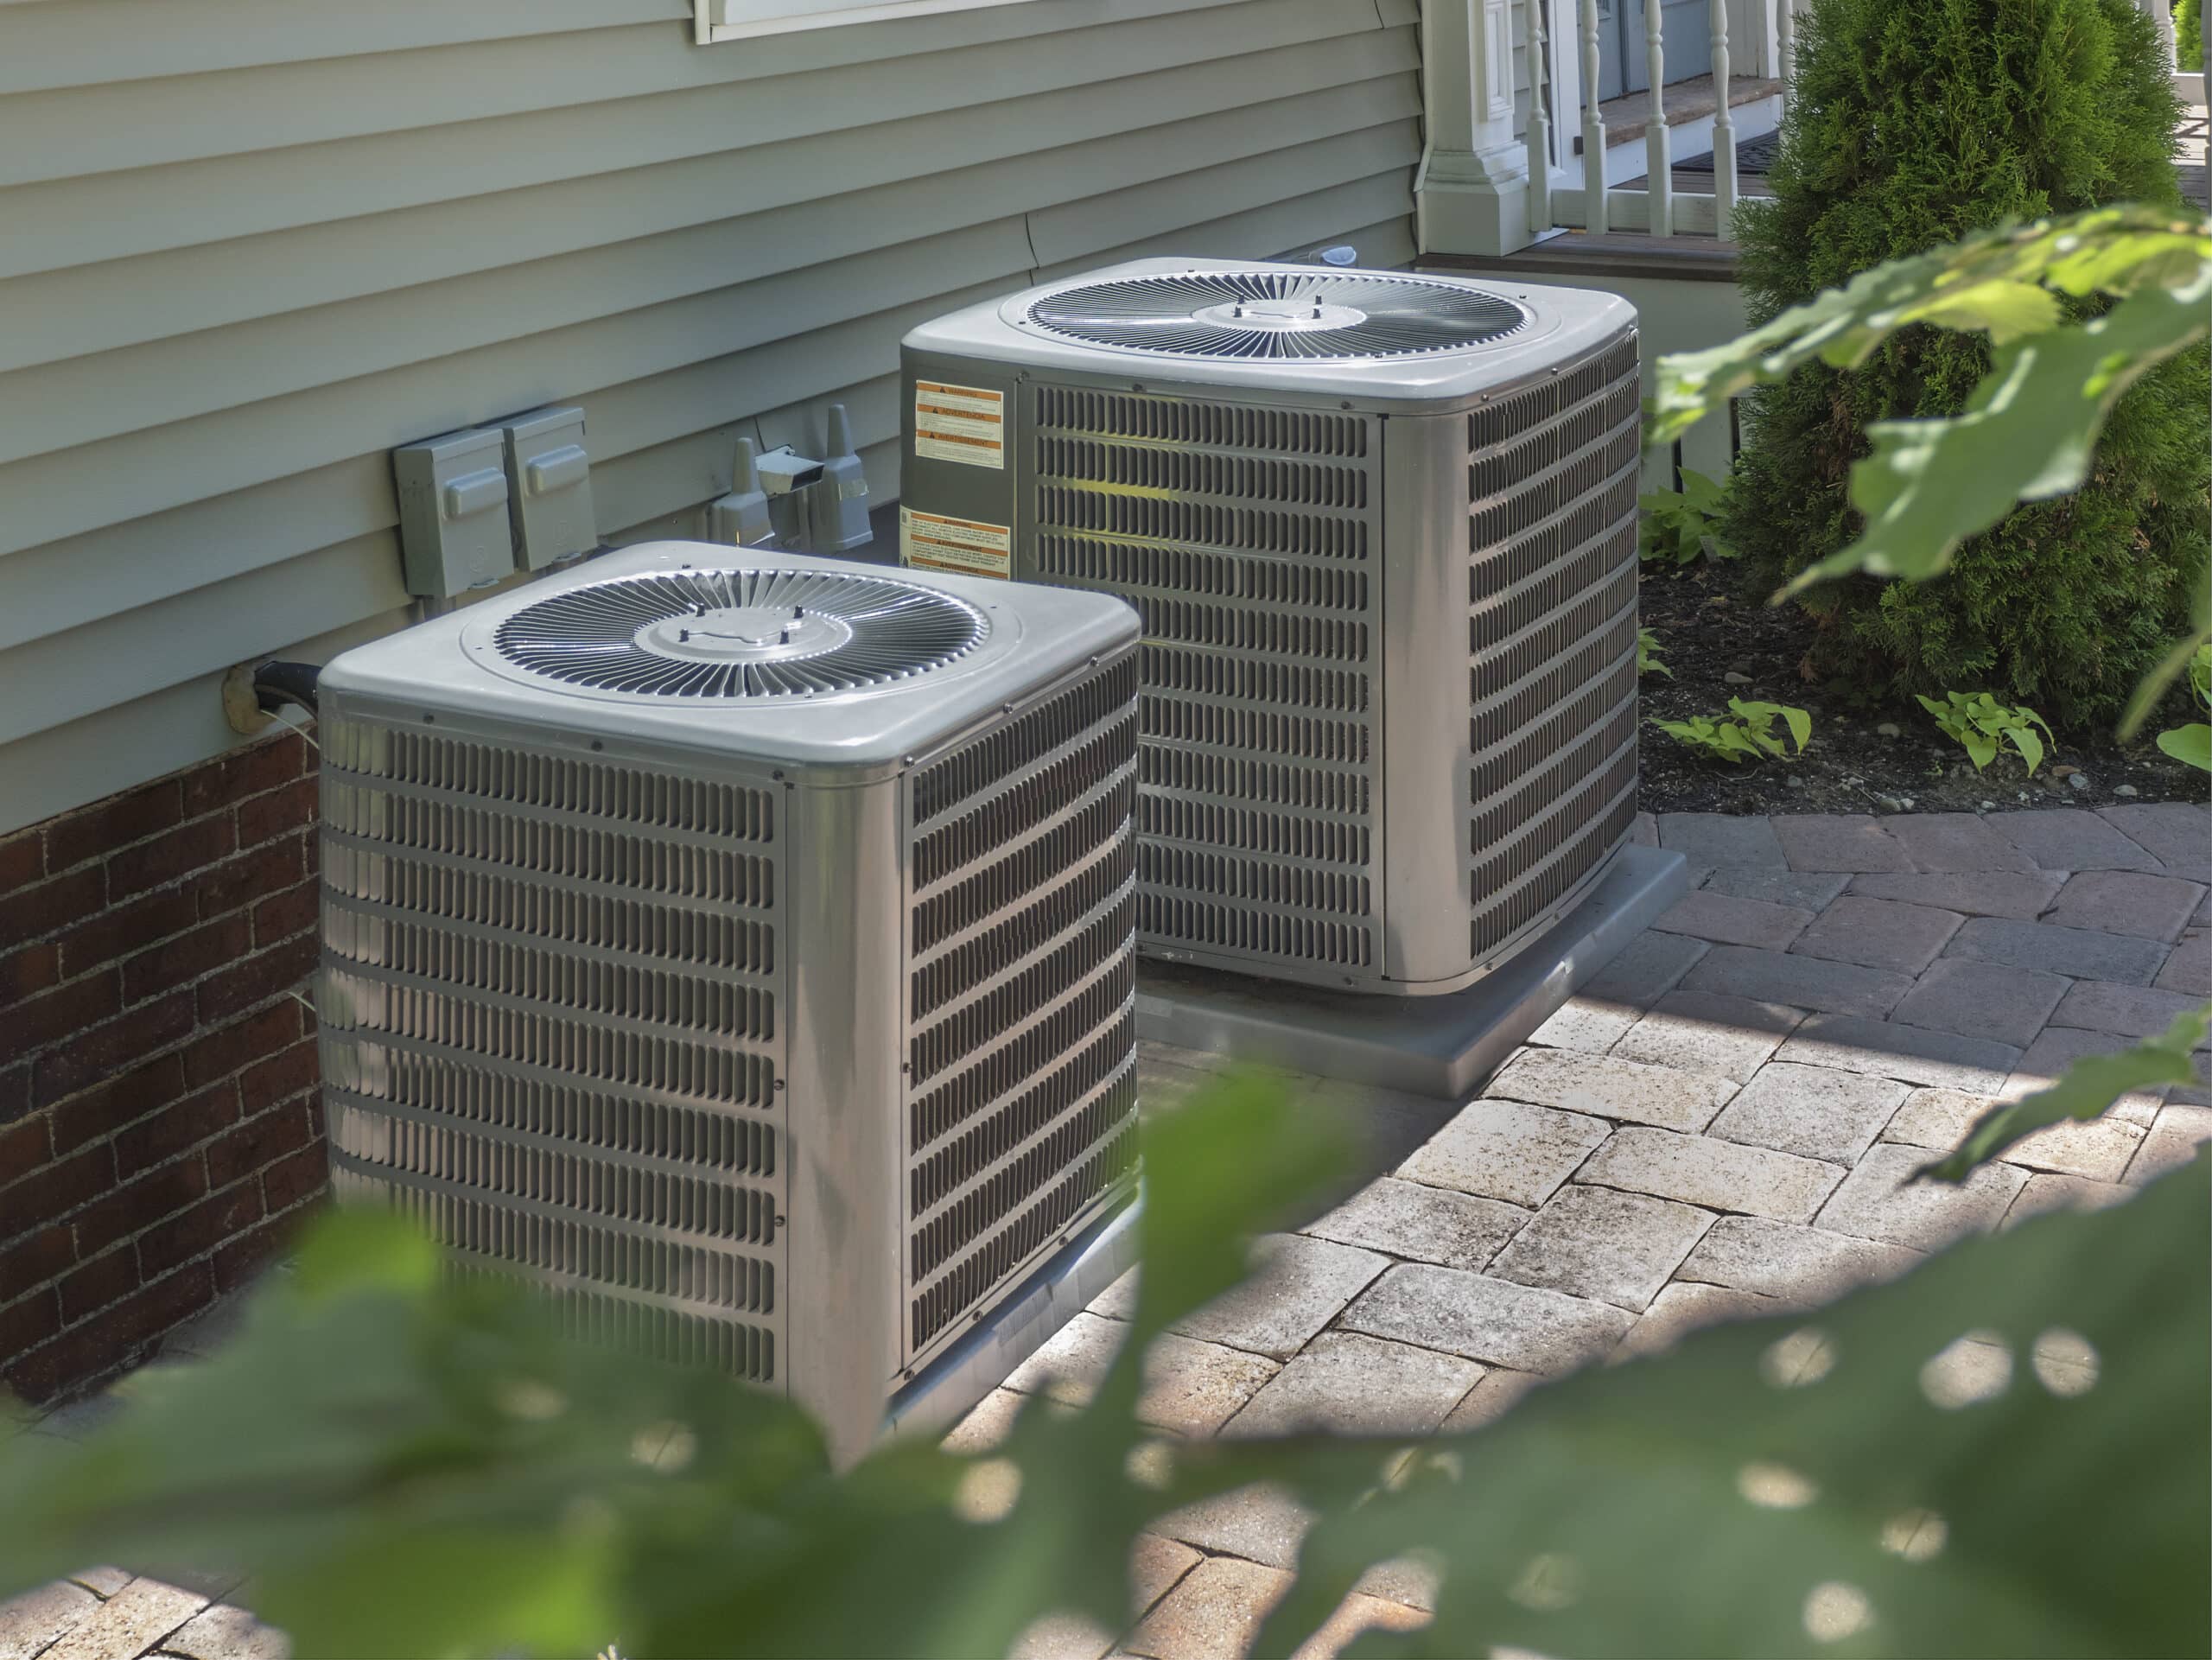 Newly installed AC units outside an Ohio home